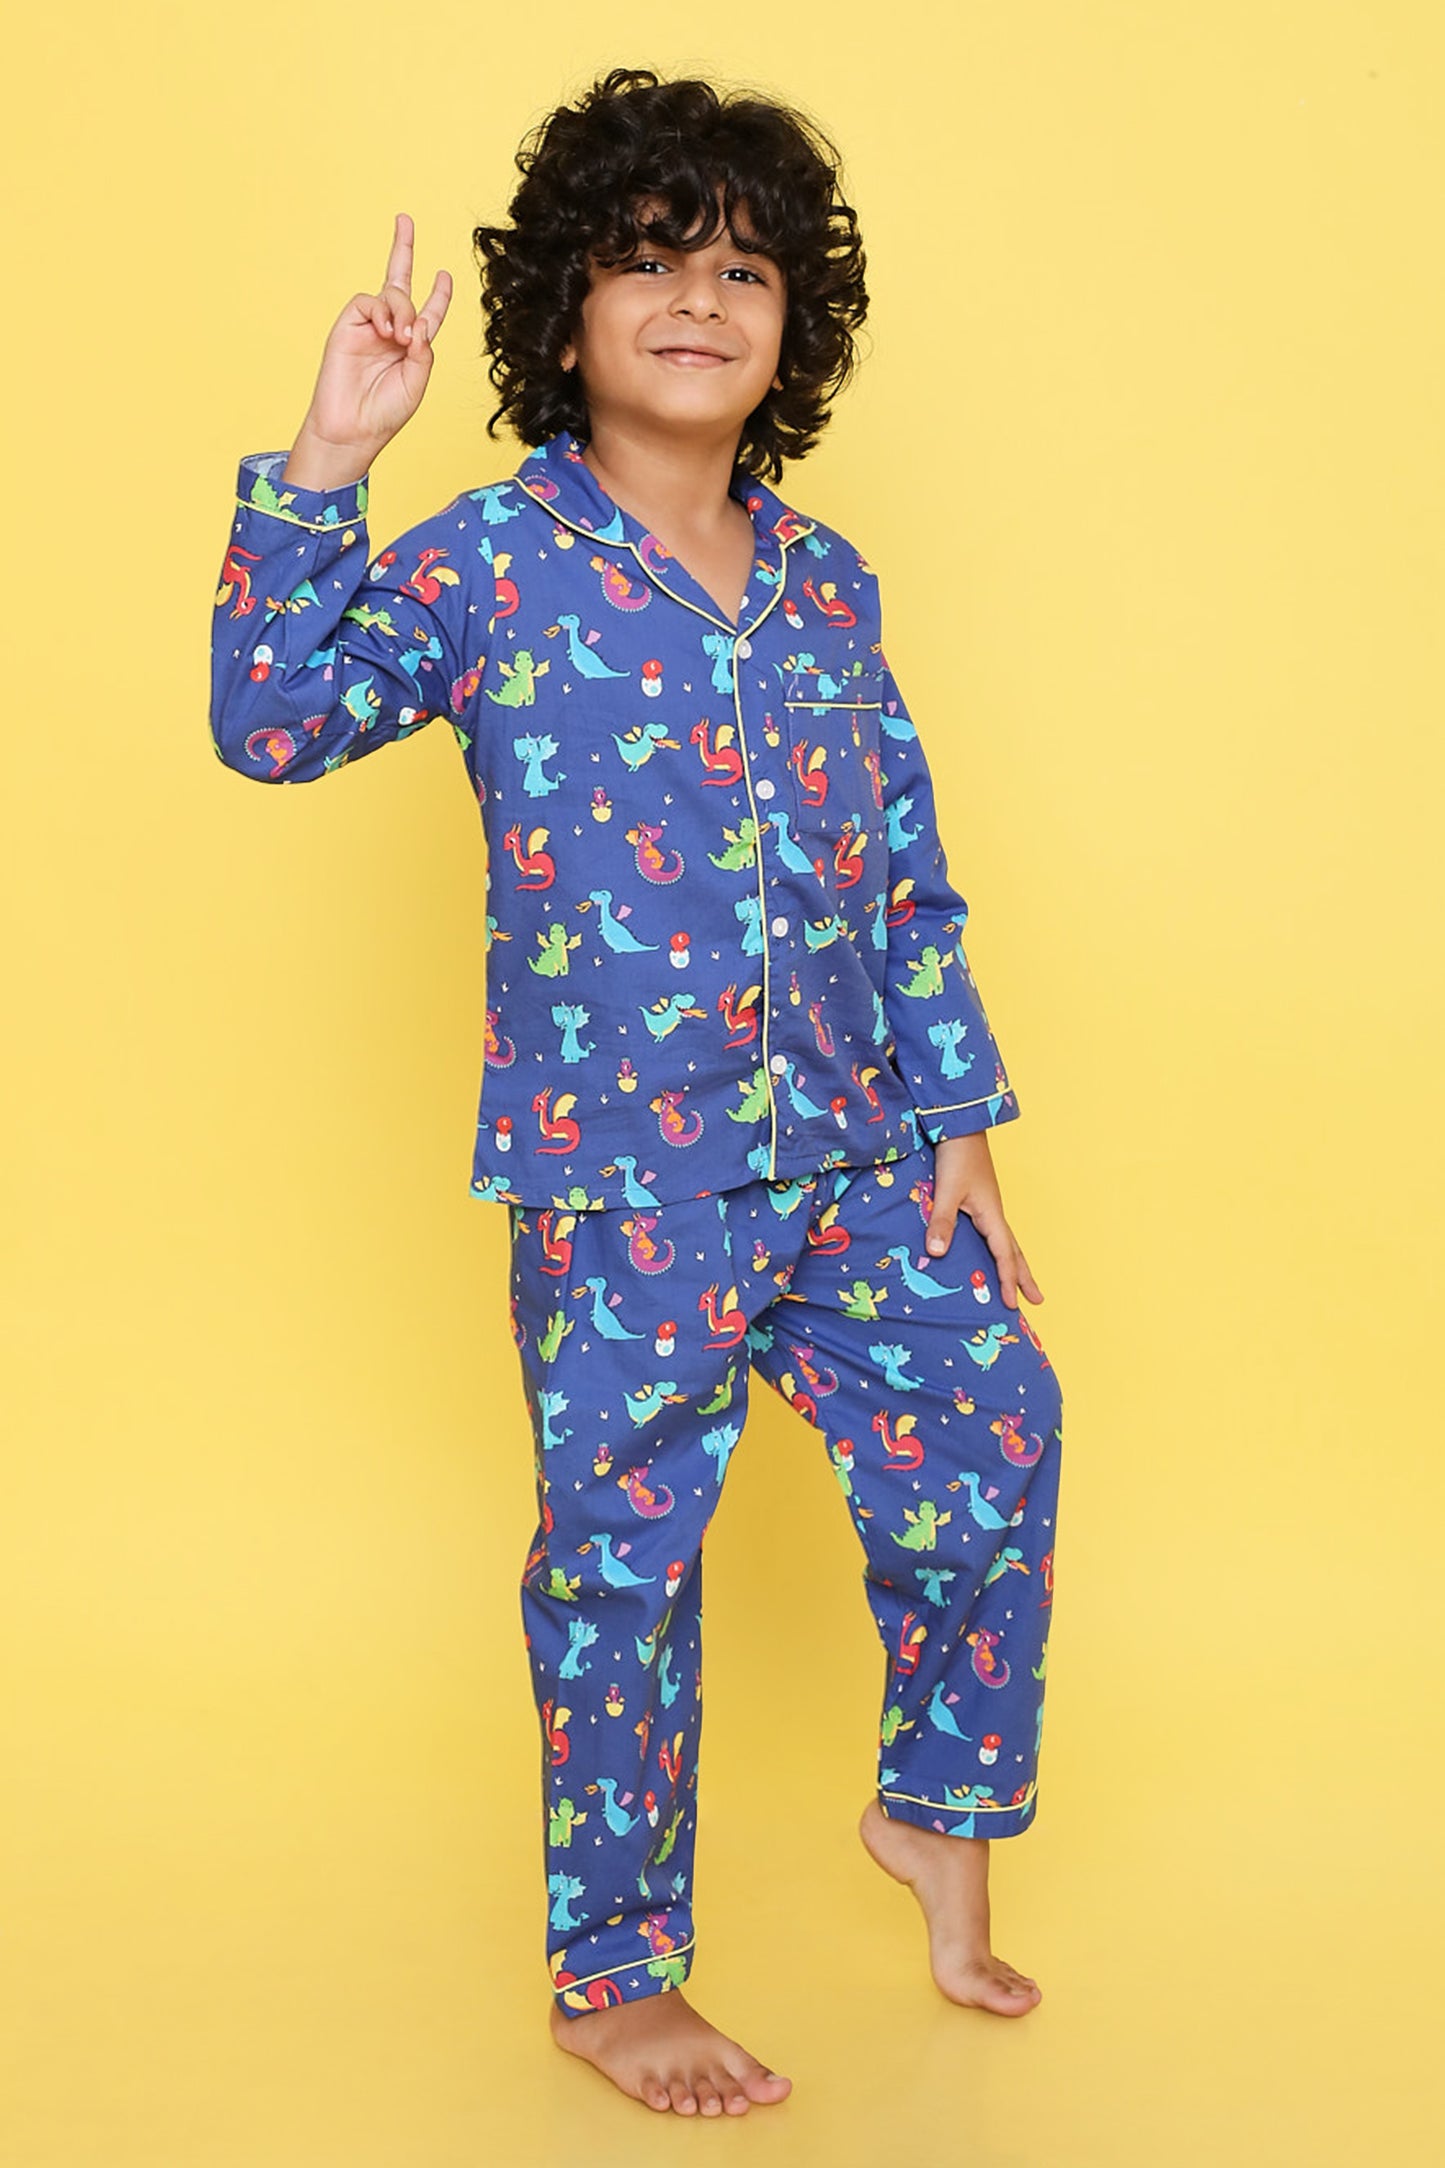 Knitting Doodles Premium cotton Kids' Notched Collar Night suit in Cute Dragons Print- Blue